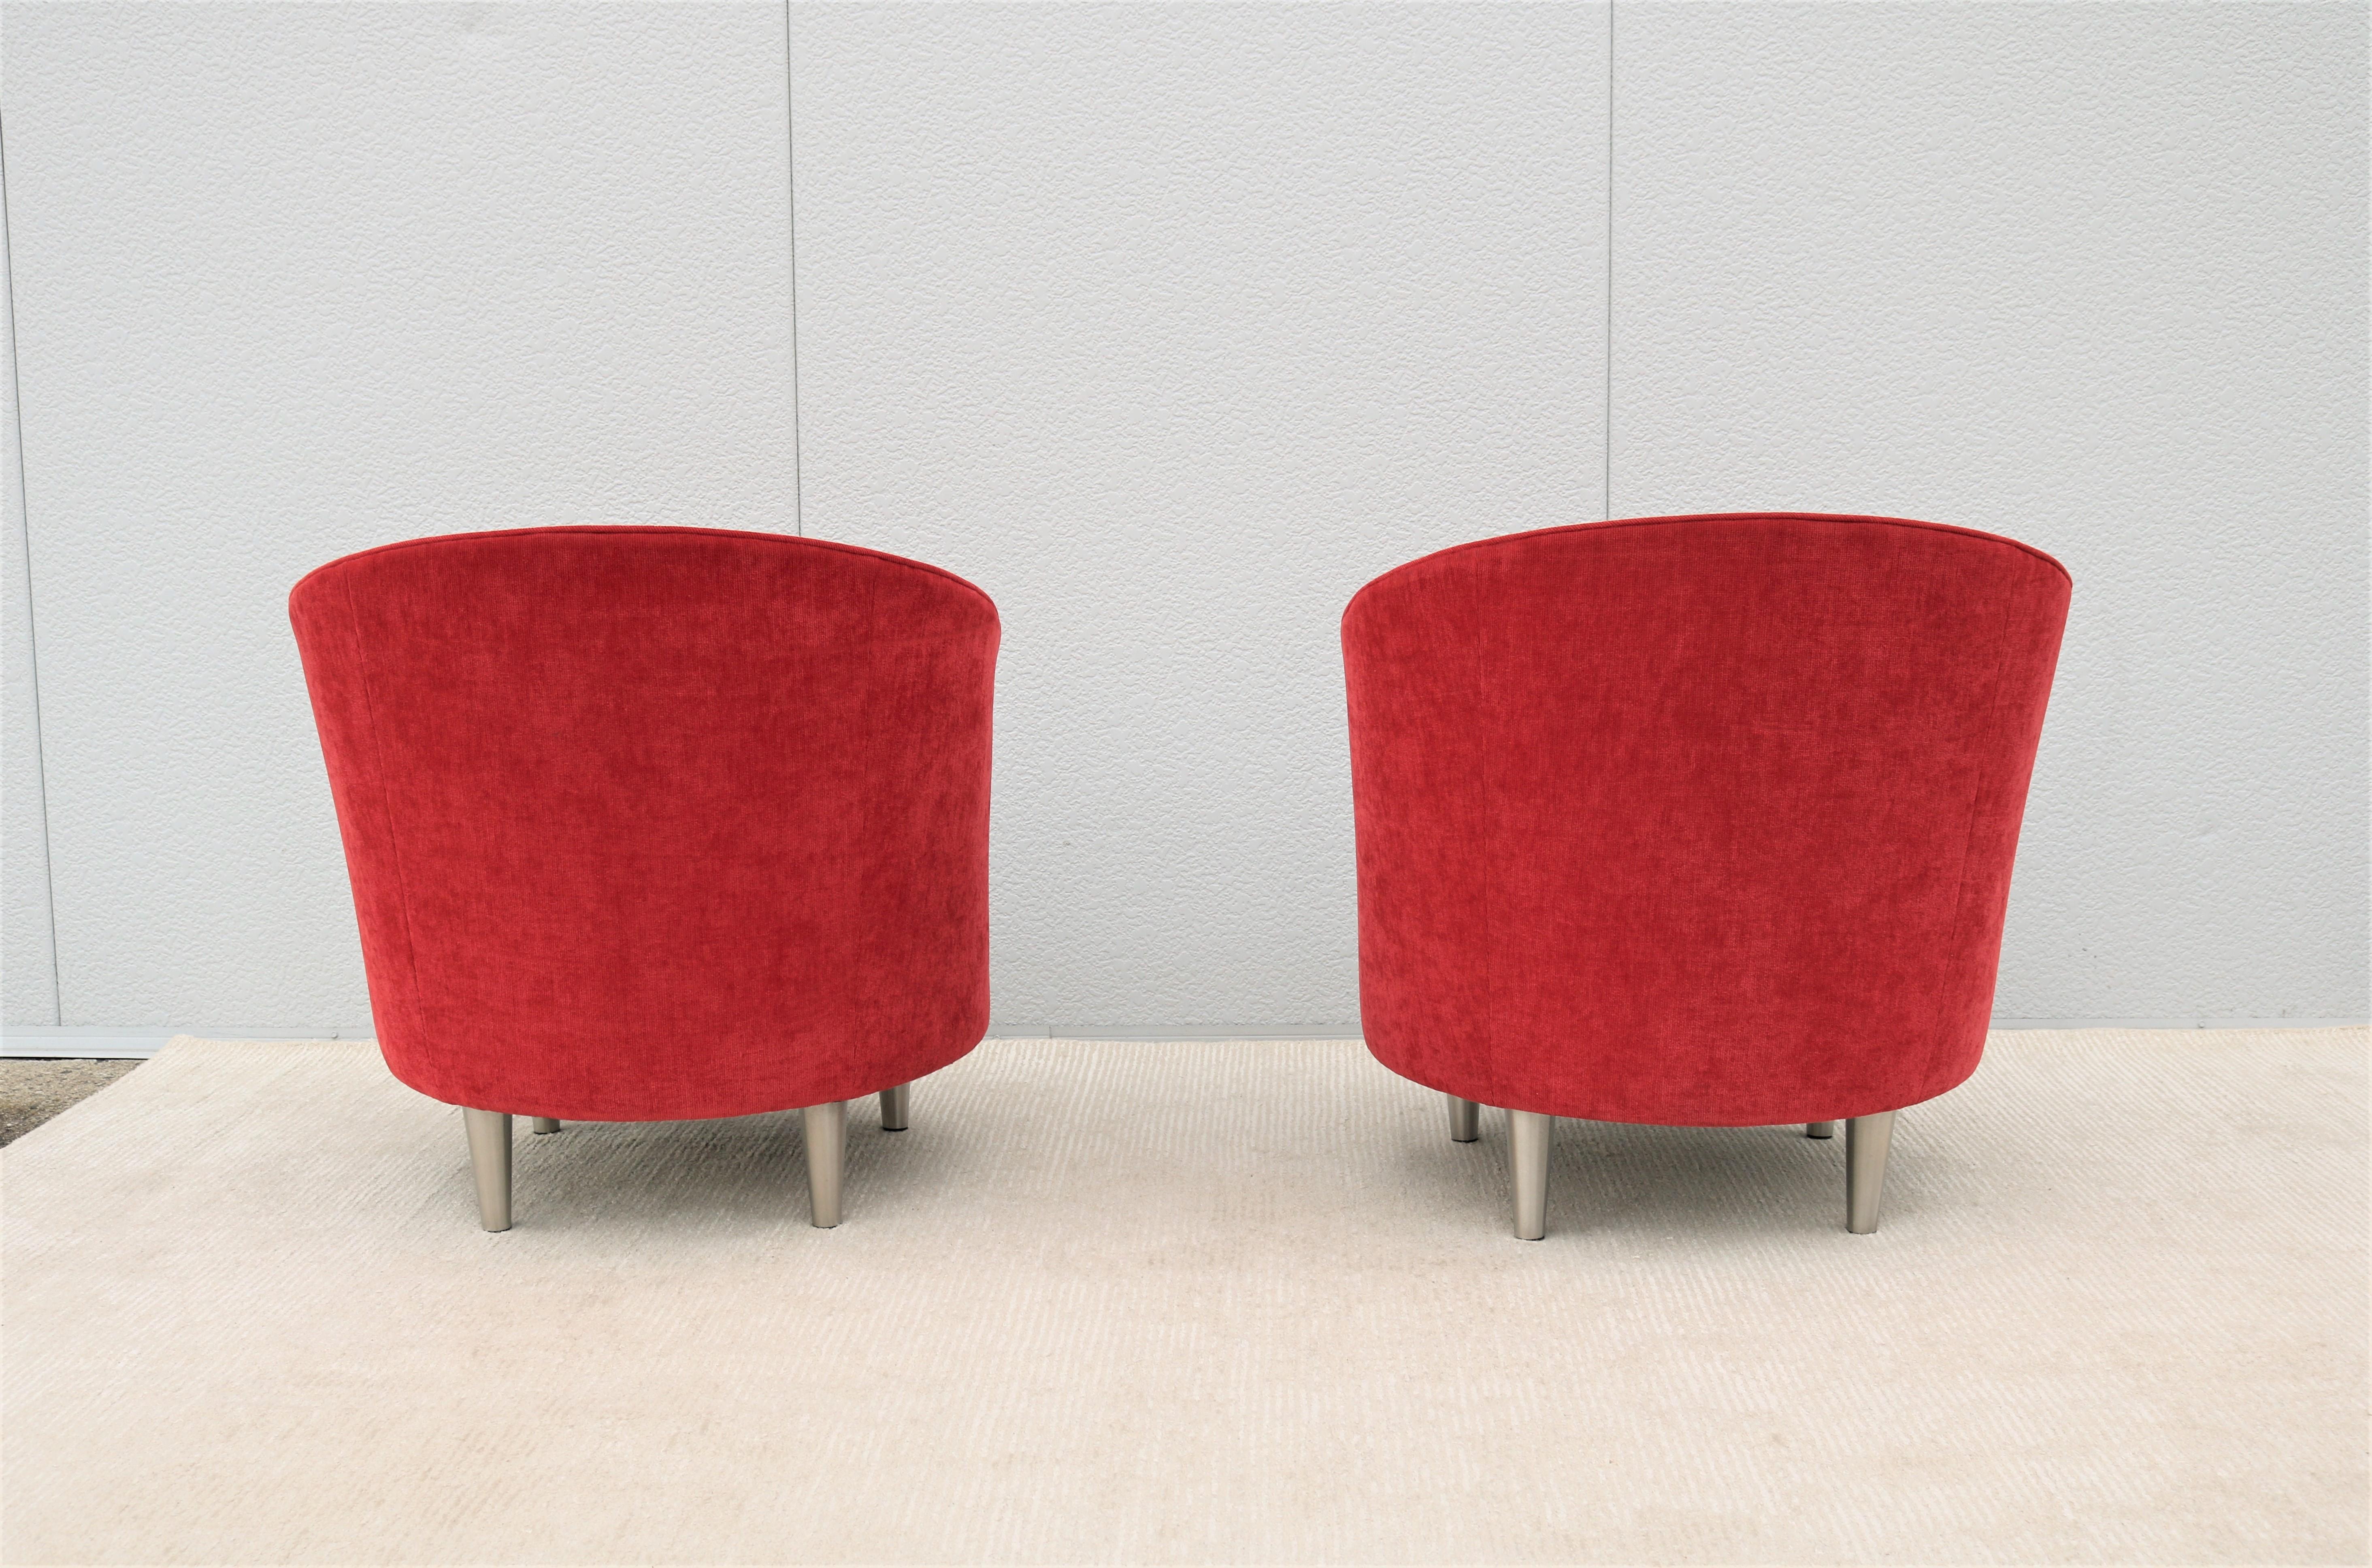 Contemporary Modern Martin Brattrud Kinsale Red Barrel Lounge Chairs, a Pair For Sale 2